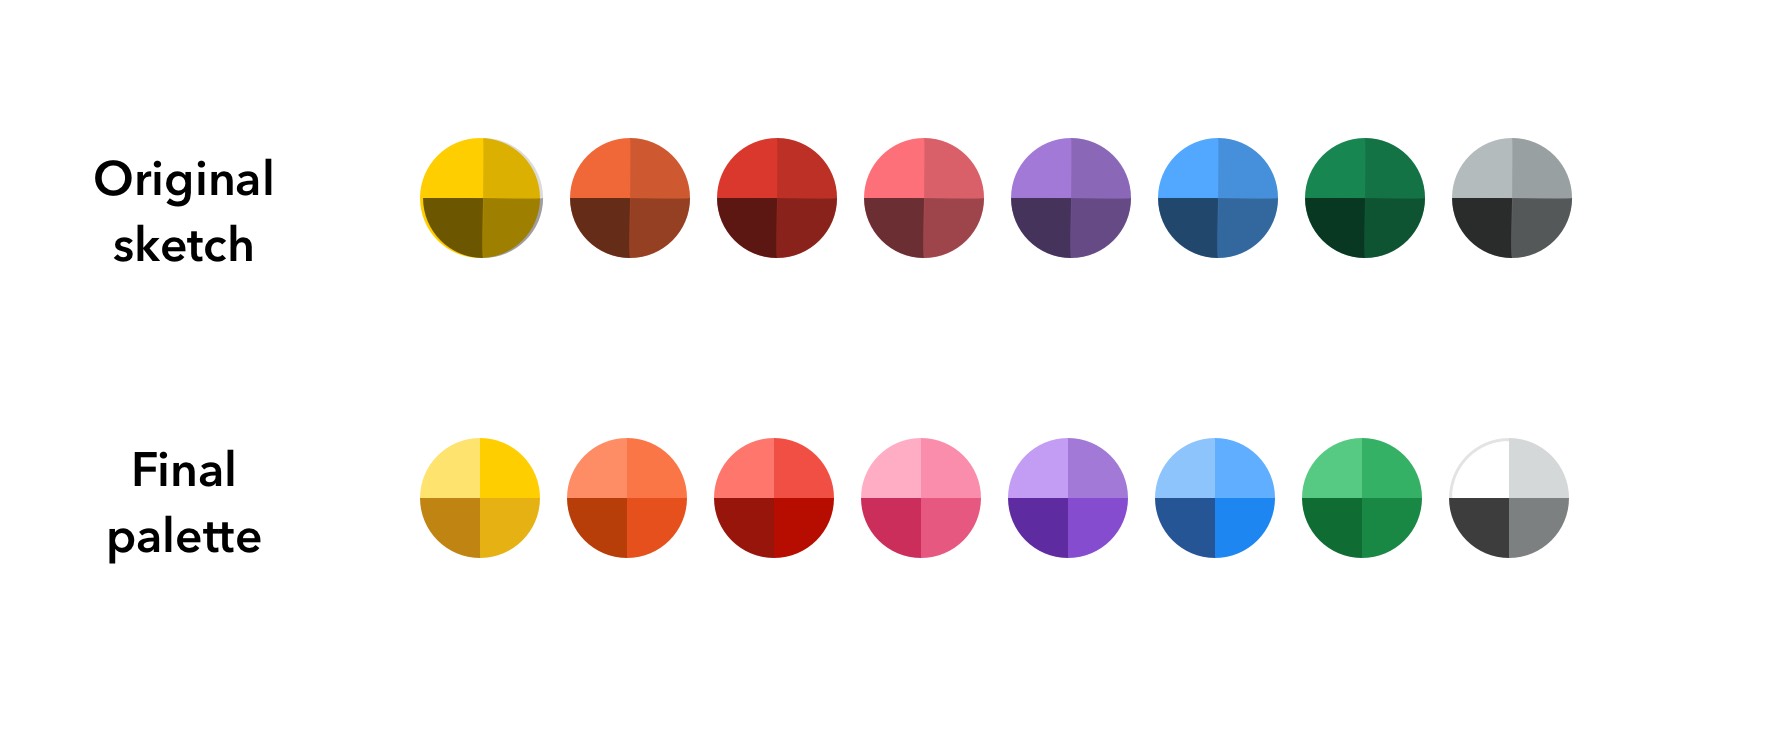 Before/after comparison of how the color family palettes evolved